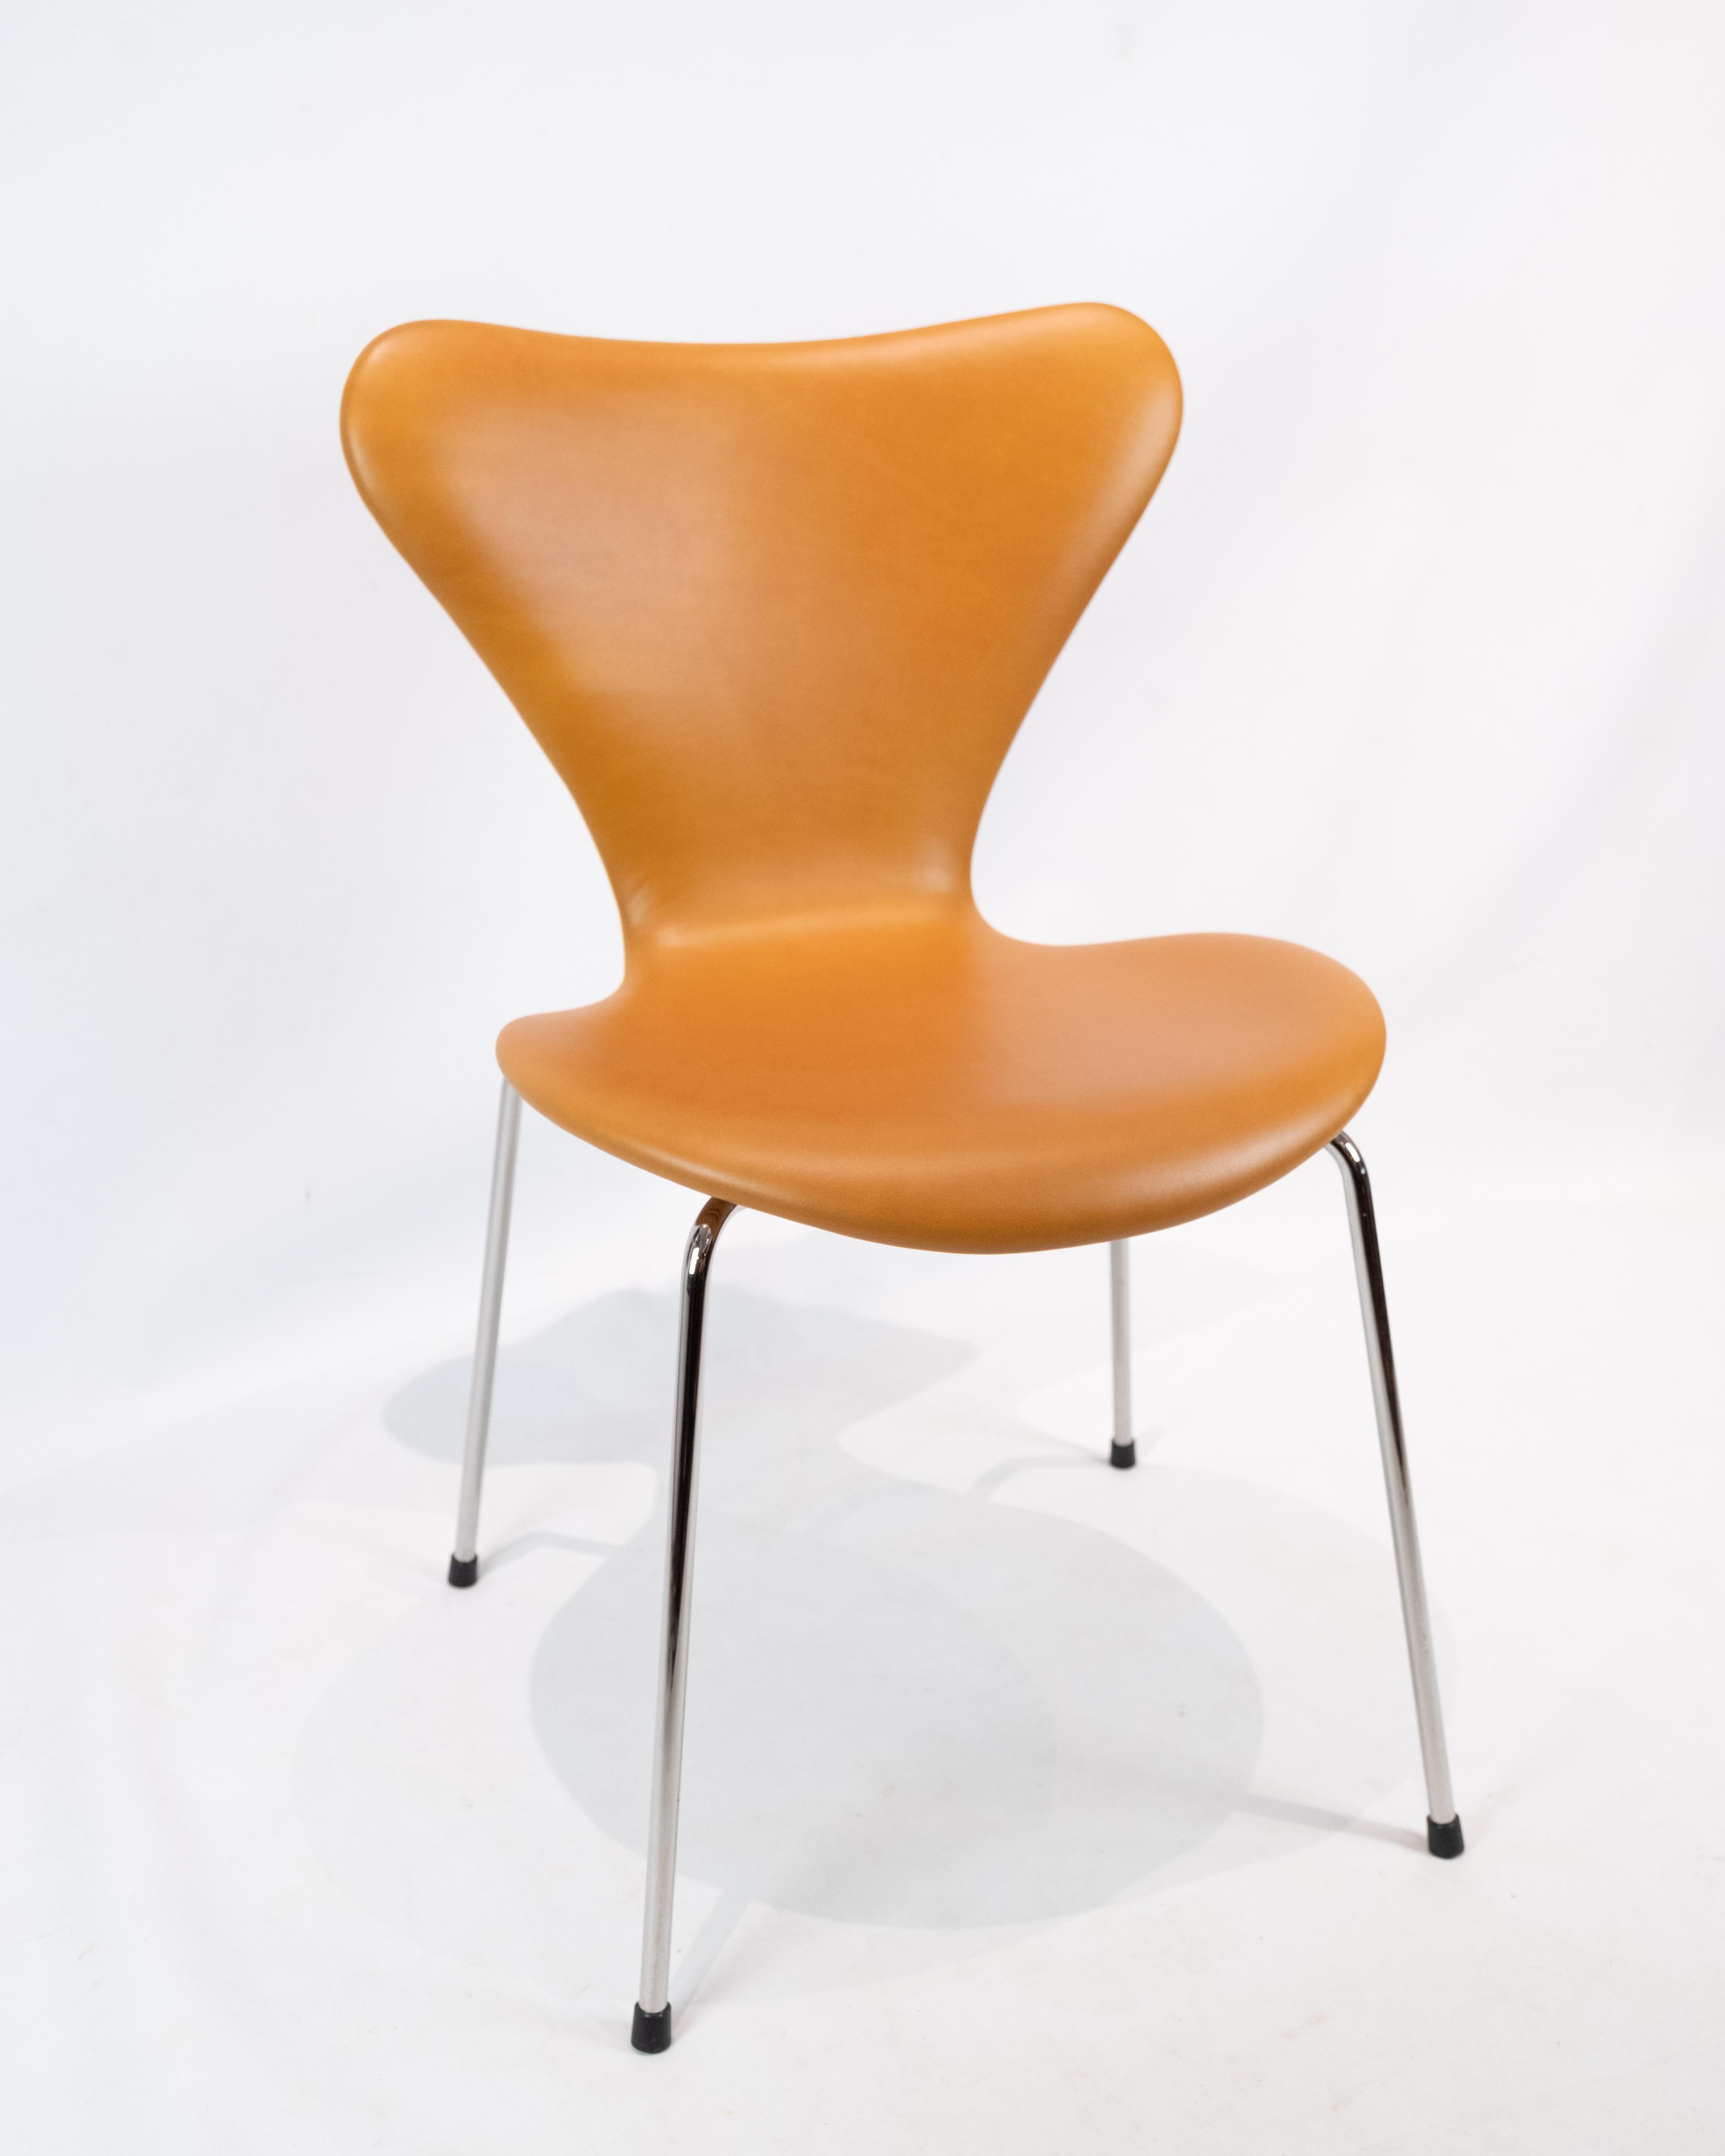 Exquisite Set of 6 Model 3107 Chairs by Arne Jacobsen, crafted by Fritz Hansen, elegantly clad in sumptuous cognac classic leather upholstery.

These iconic chairs, a testament to Jacobsen's visionary design and Fritz Hansen's impeccable